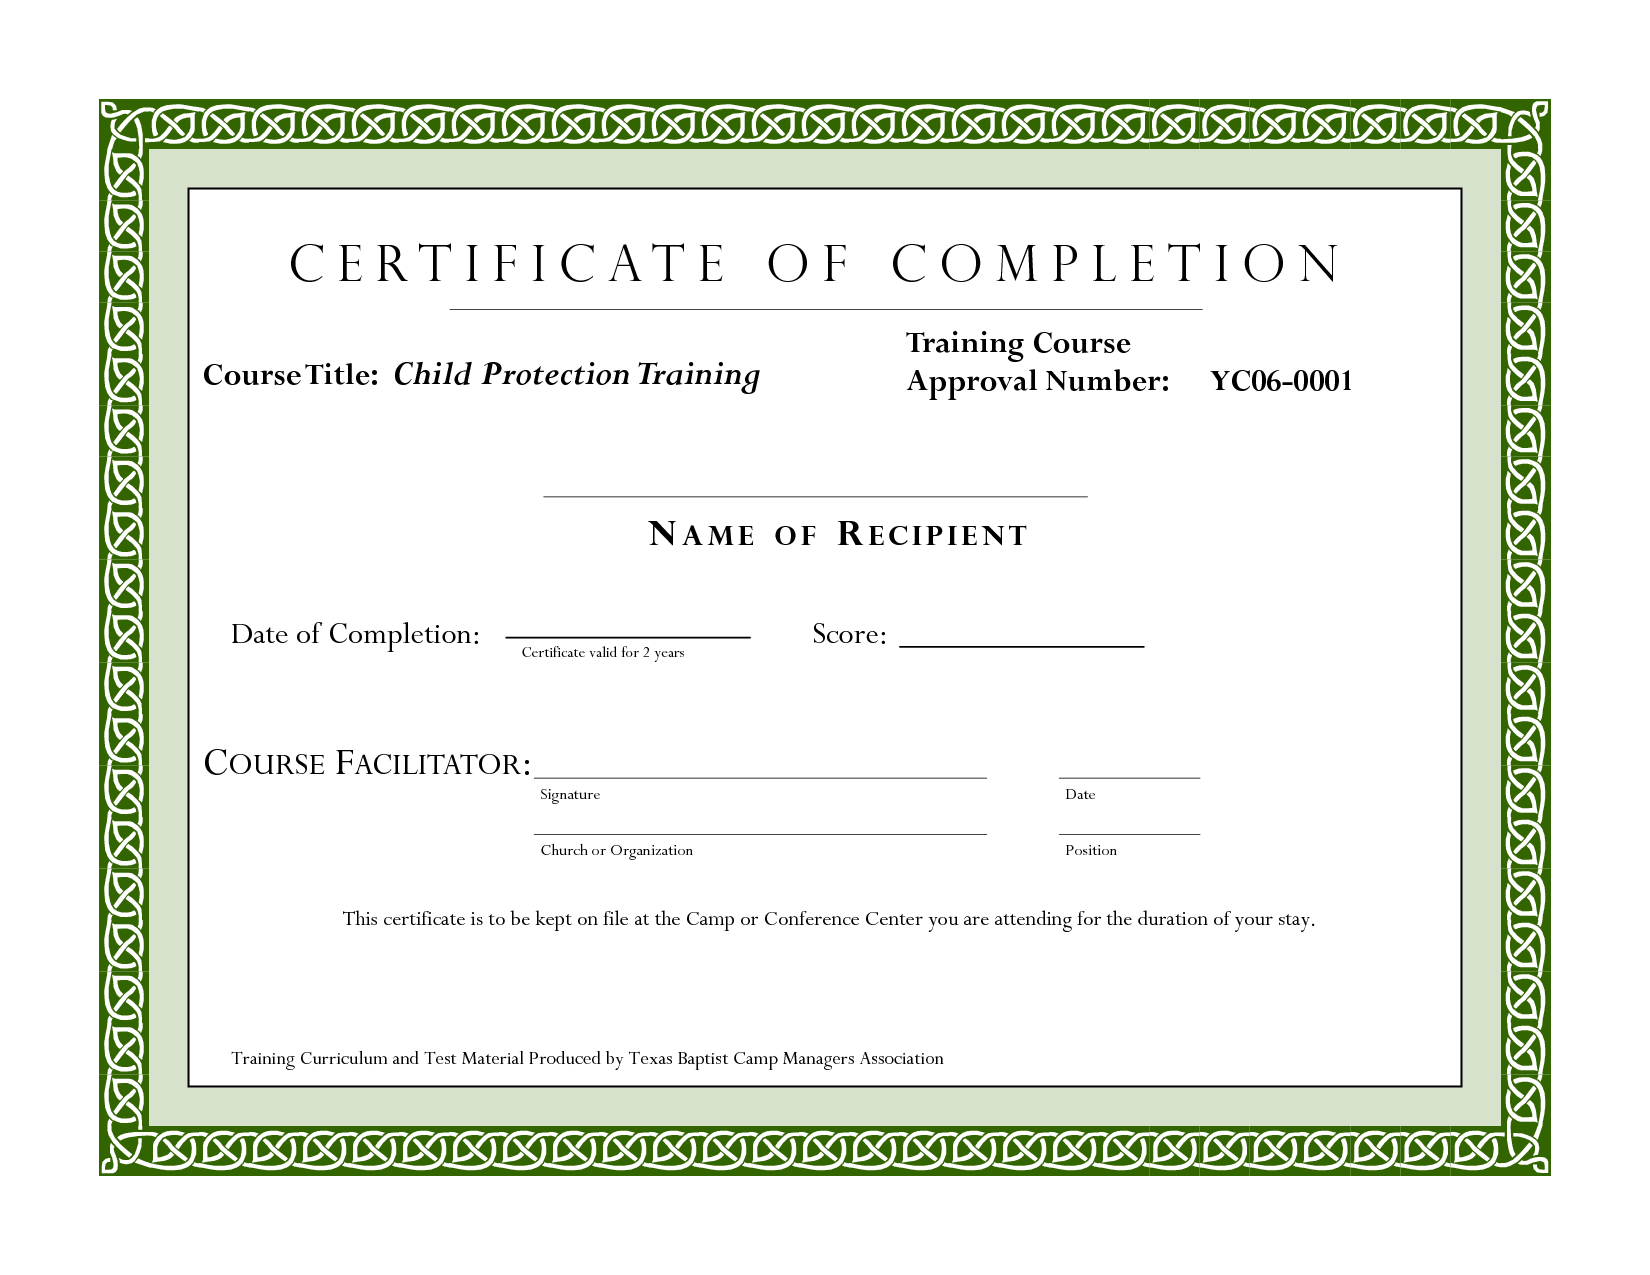 Course Completion Certificate Template | Certificate Of Within Certificate Of Completion Free Template Word